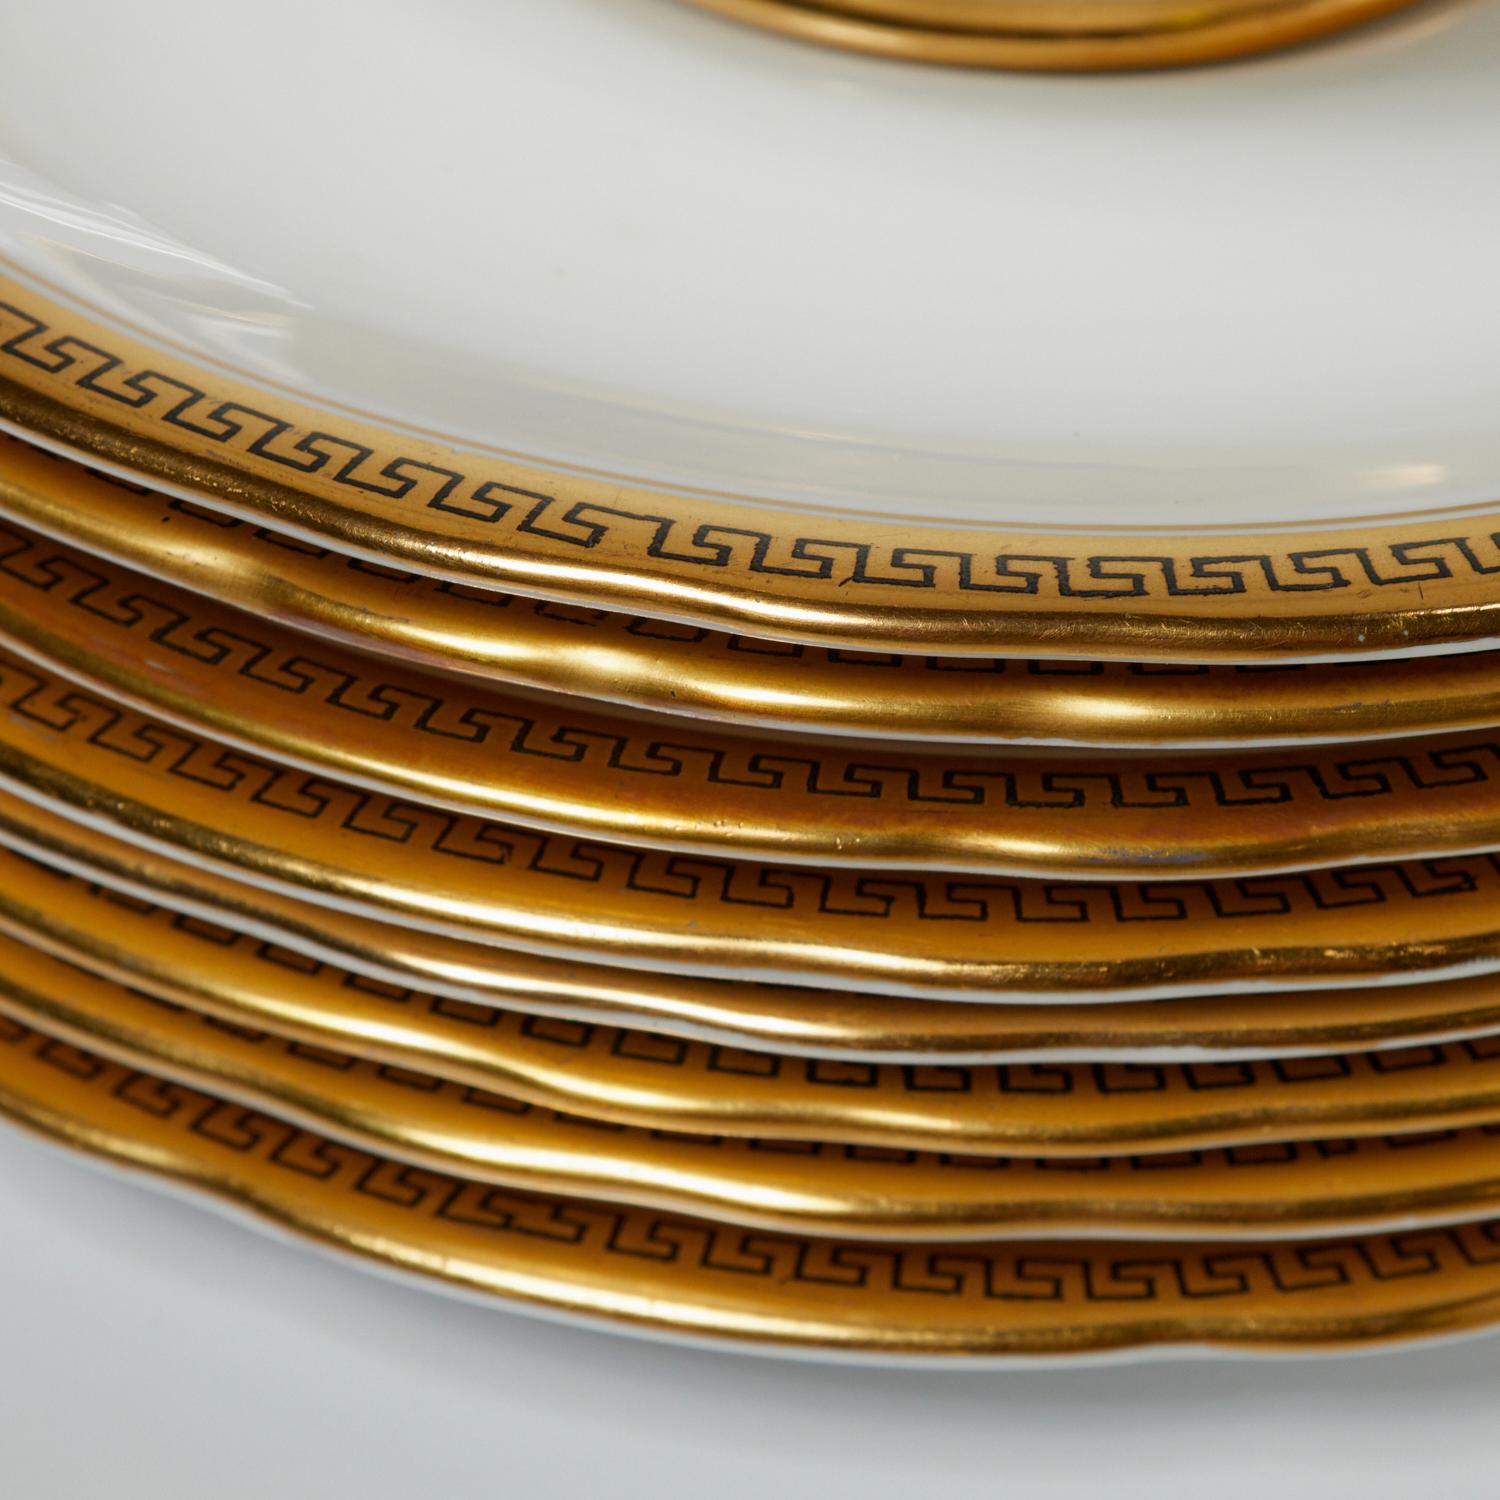 Glazed Mid 20th C. English Porcelain Dinner Service (52 Pieces) for Harrods of London For Sale